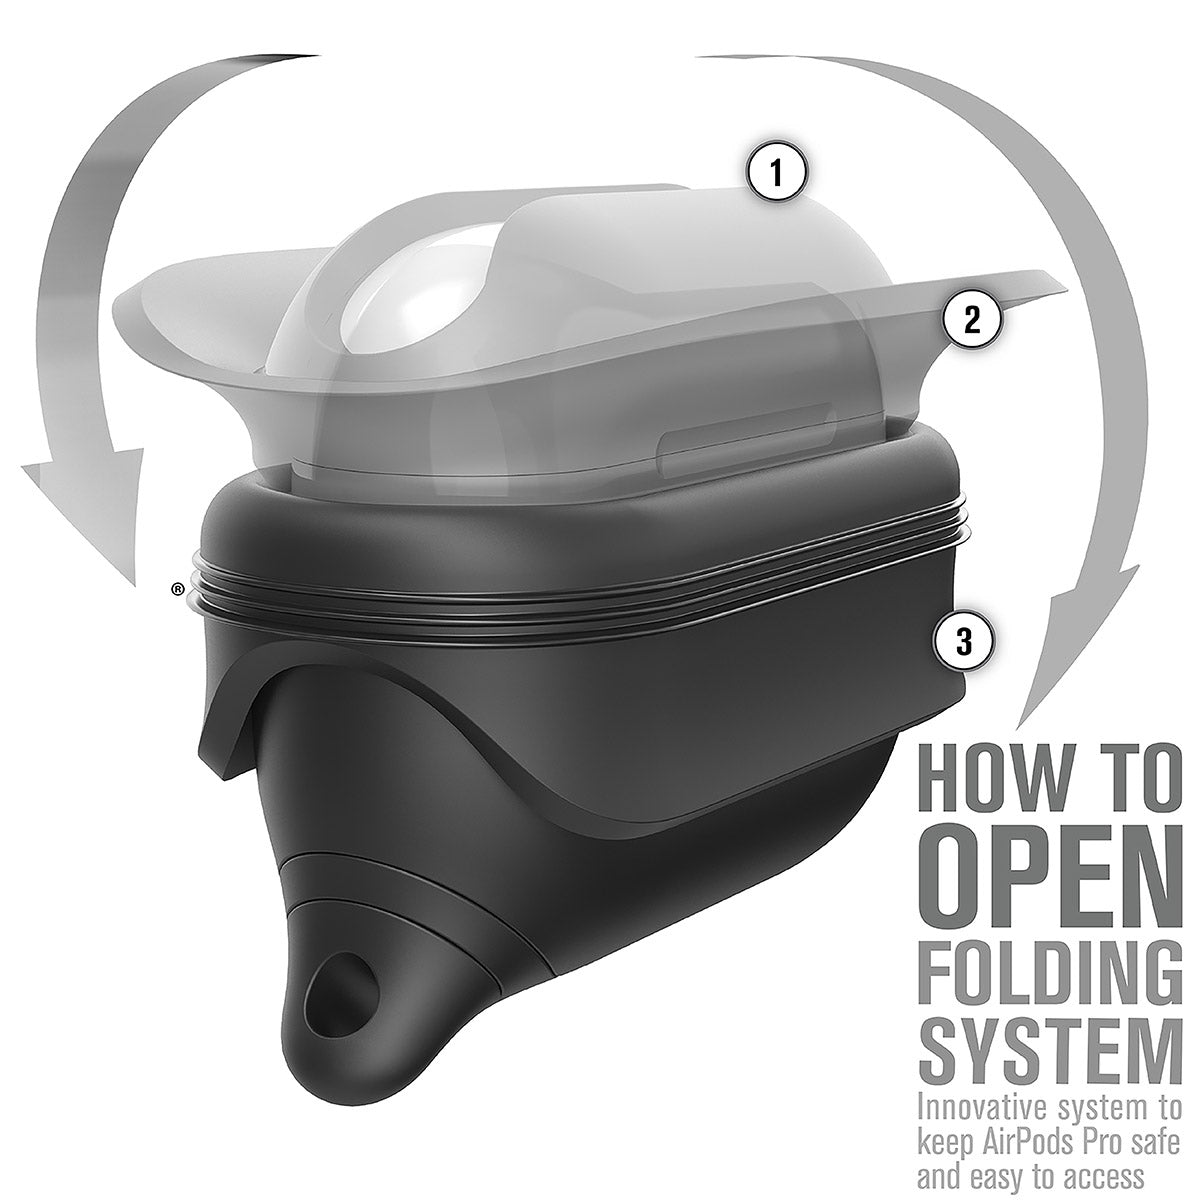 catalyst airpods pro gen 2 1 waterproof case carabiner special edition black with arrows on how to open the case text reads how to open folding system innovative system to keep airpods pro safe and easy to access